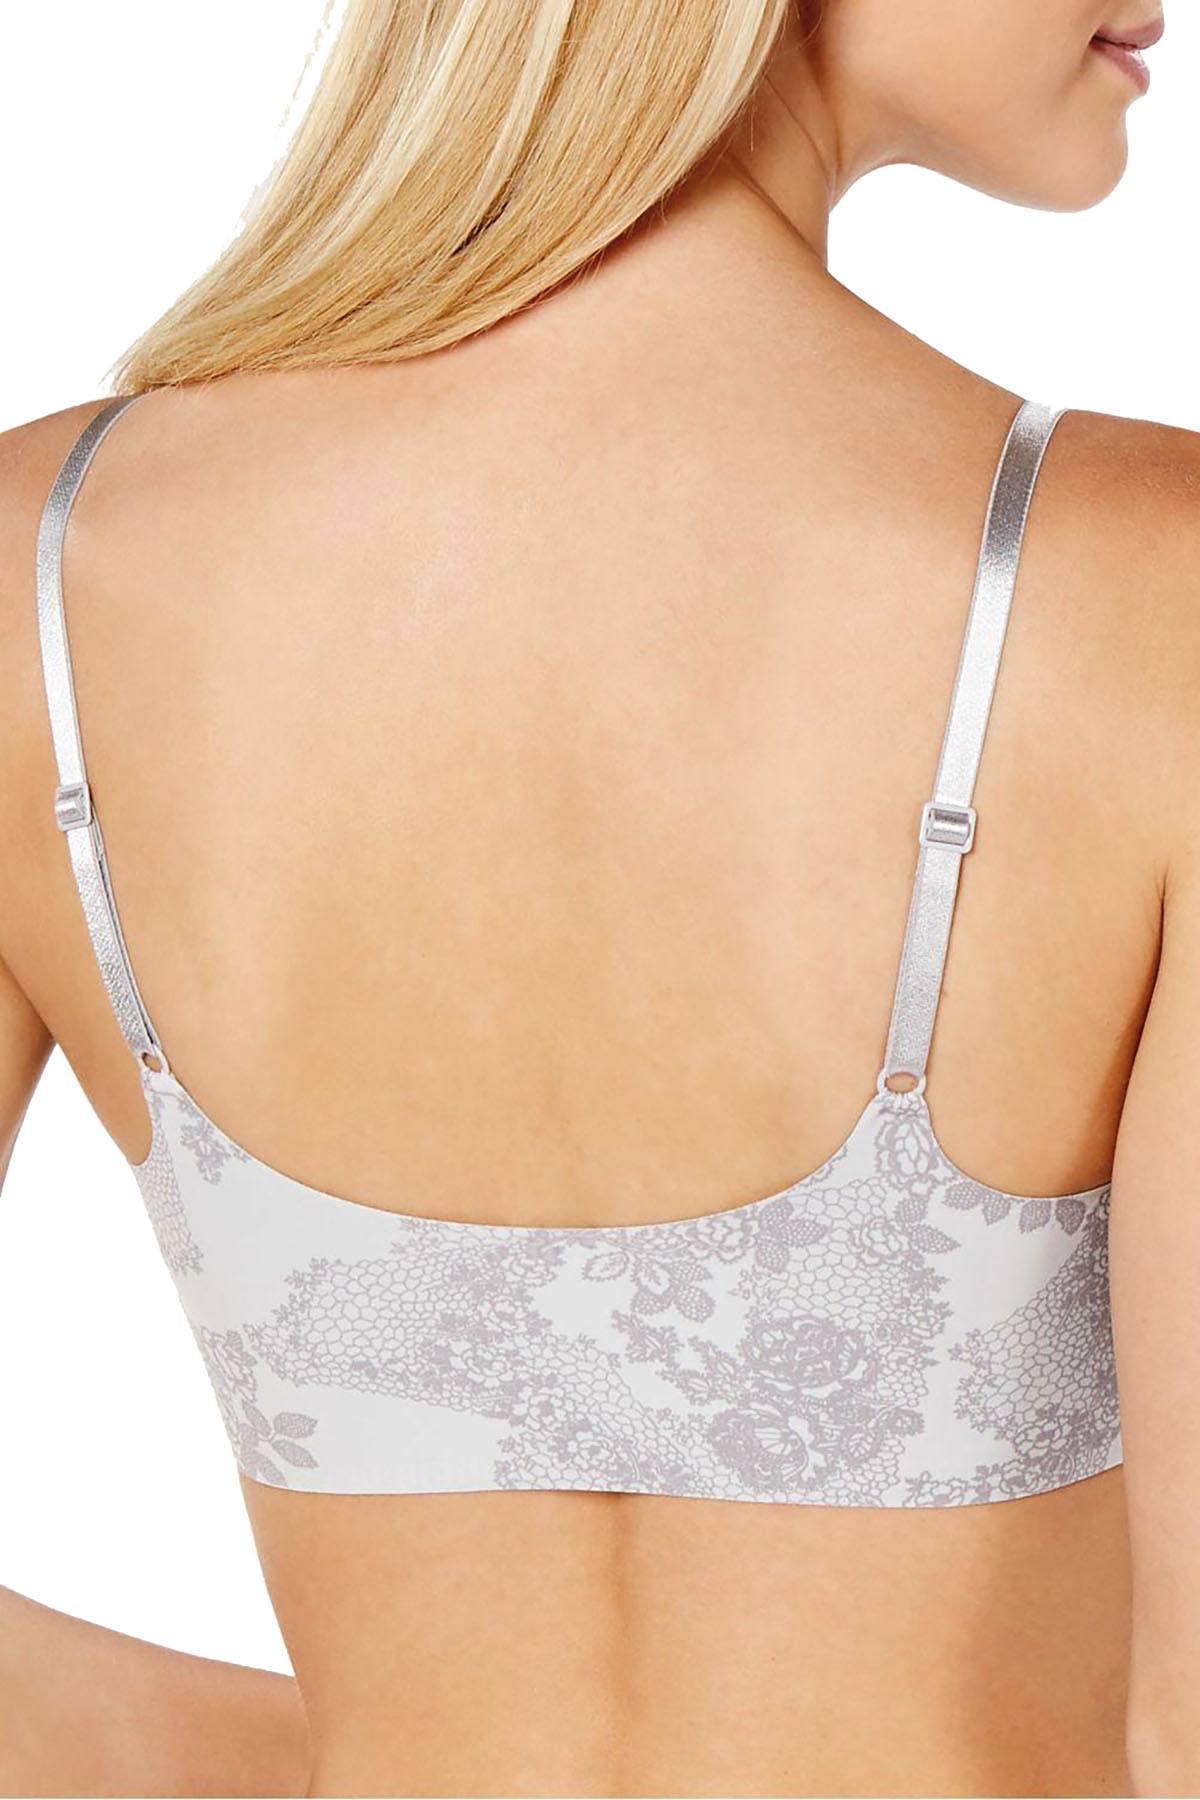 Calvin Klein Invisibles Comfort Lightly Lined Retro Bralette Qf4783